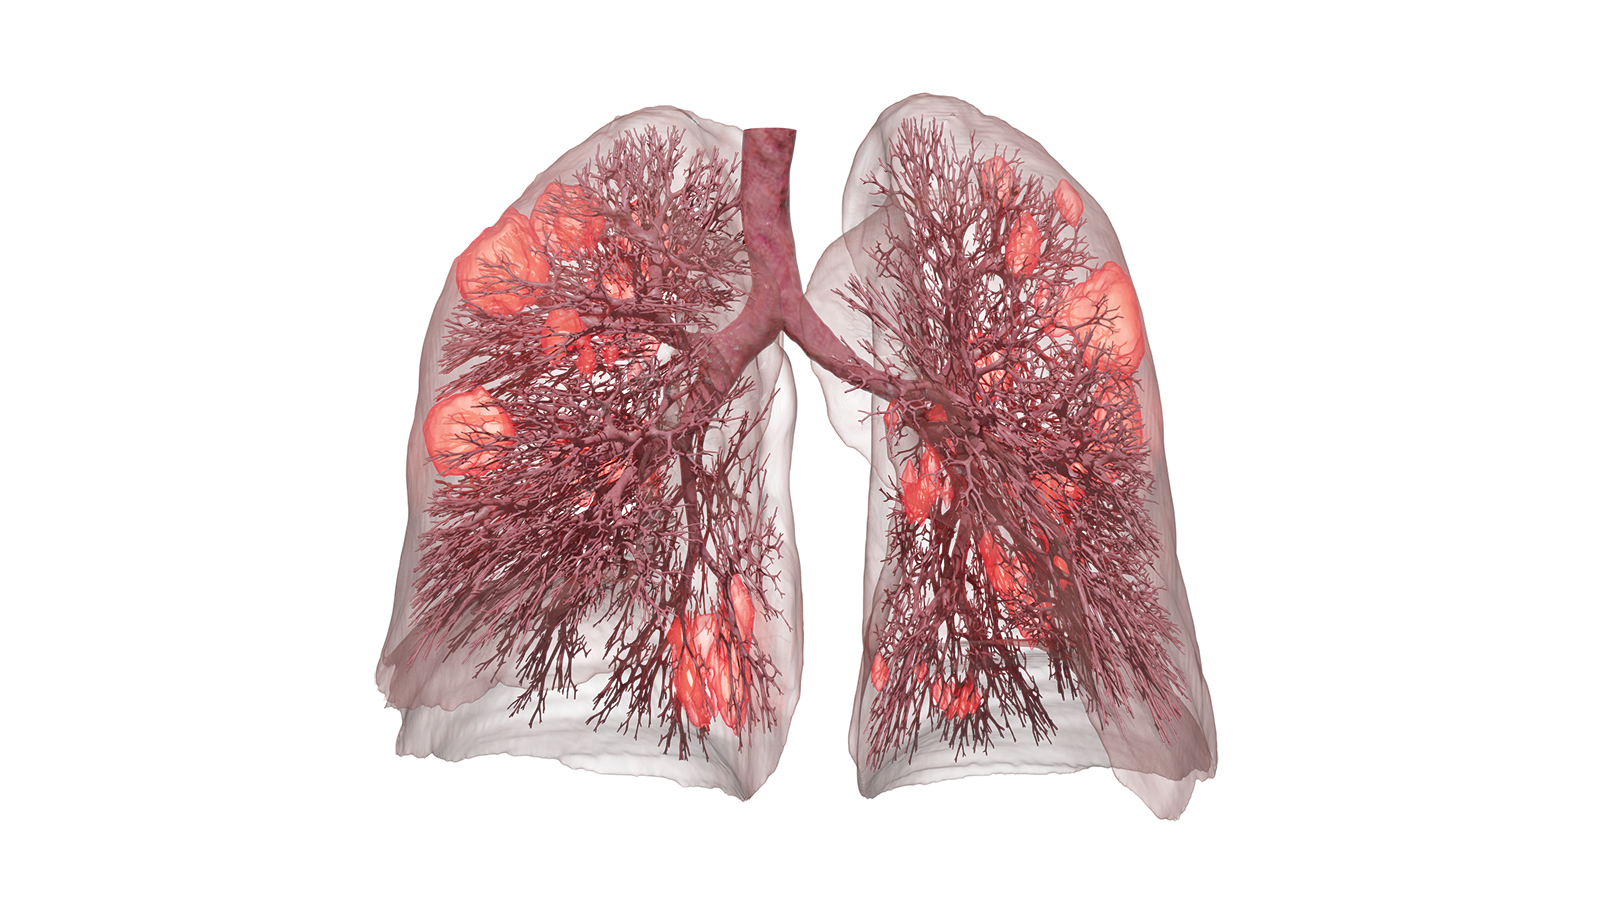 Utilizing data compiled from a CT lung scan, the software uses artificial intelligence to calculate the condition and health of a patient’s lungs. In this image, damage caused by a COVID-19 infection is marked in orange.